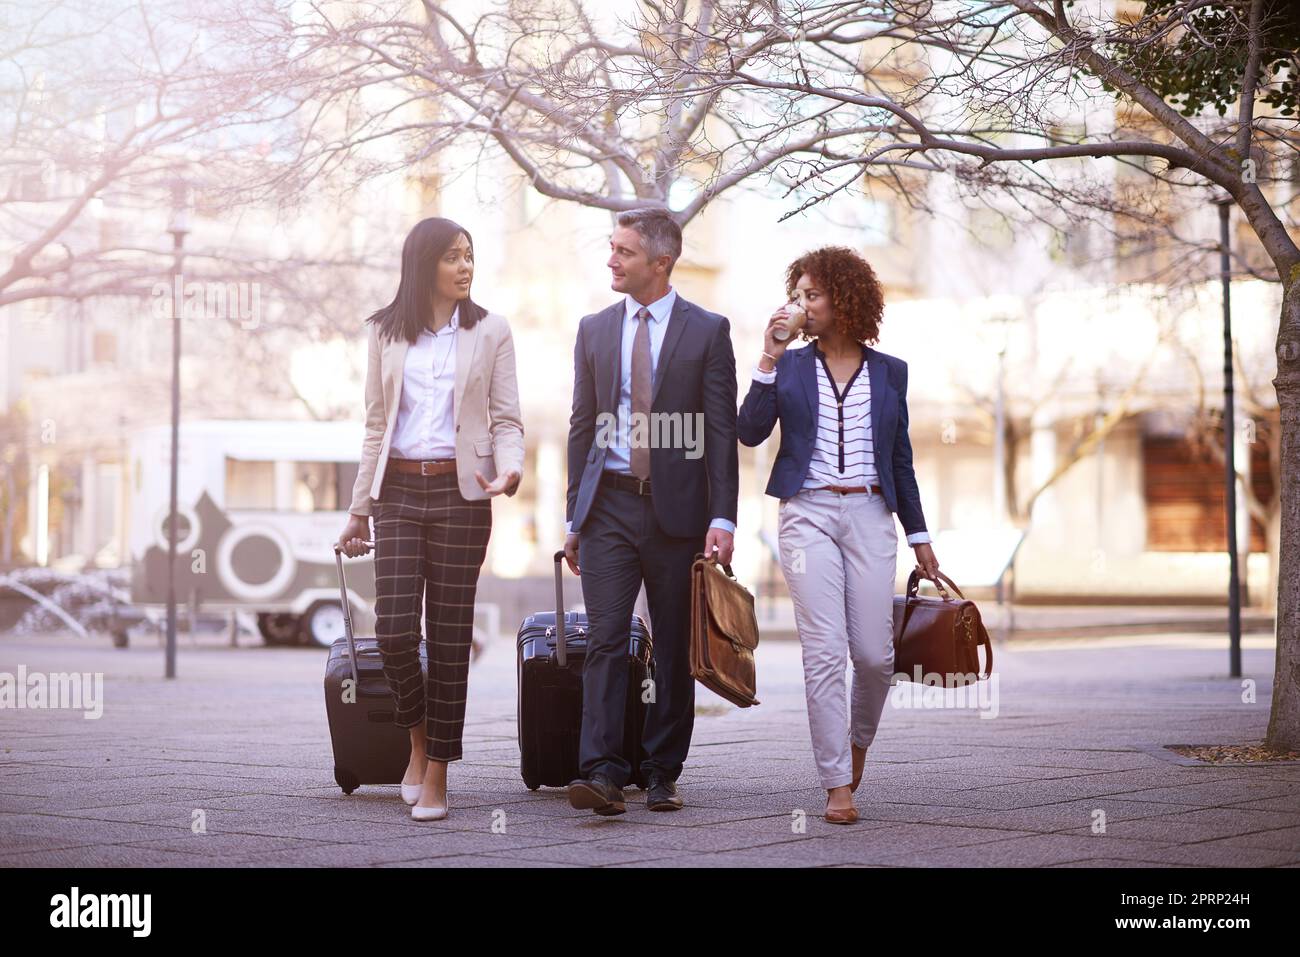 Business on the move. a group of business people walking and talking to each other while carrying their luggage outside. Stock Photo